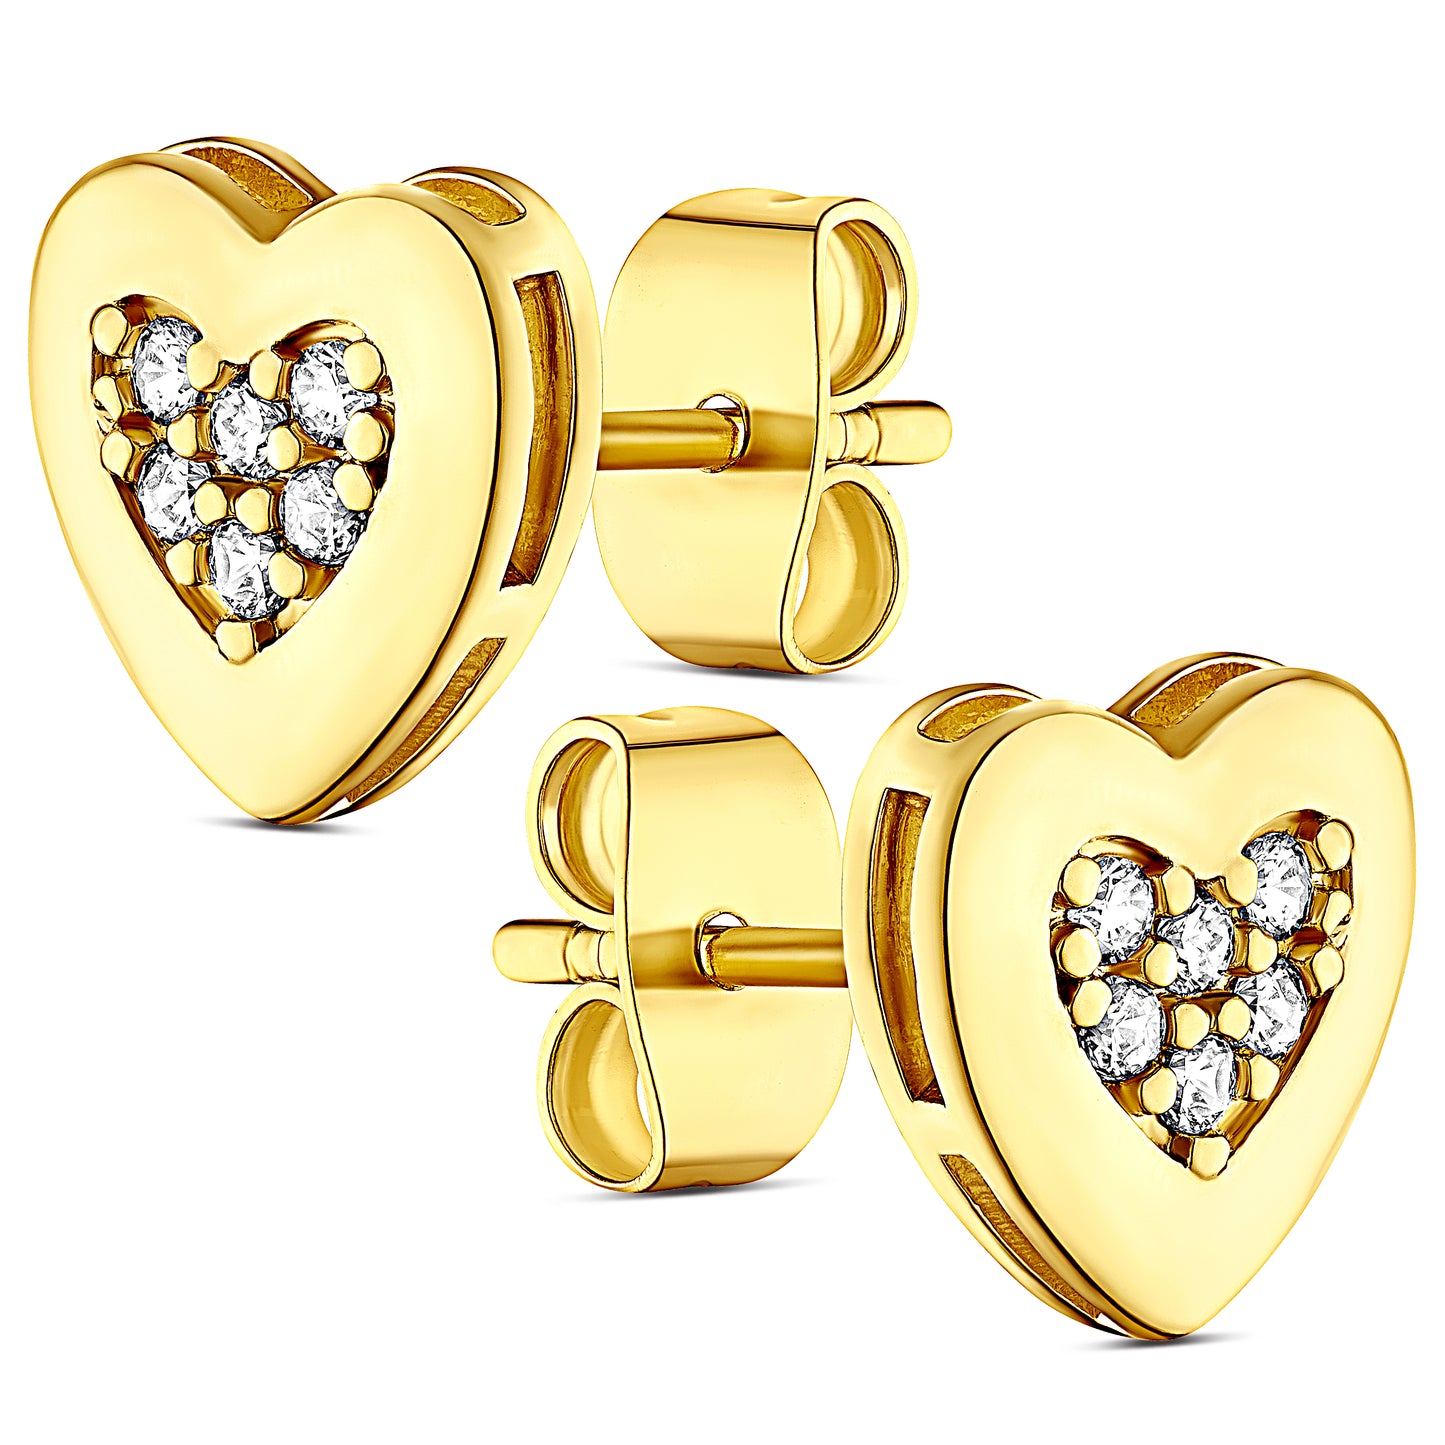 14K Gold Plated Heart Earring with CZ Stones, Pouch, Bath Bomb & Gift Box